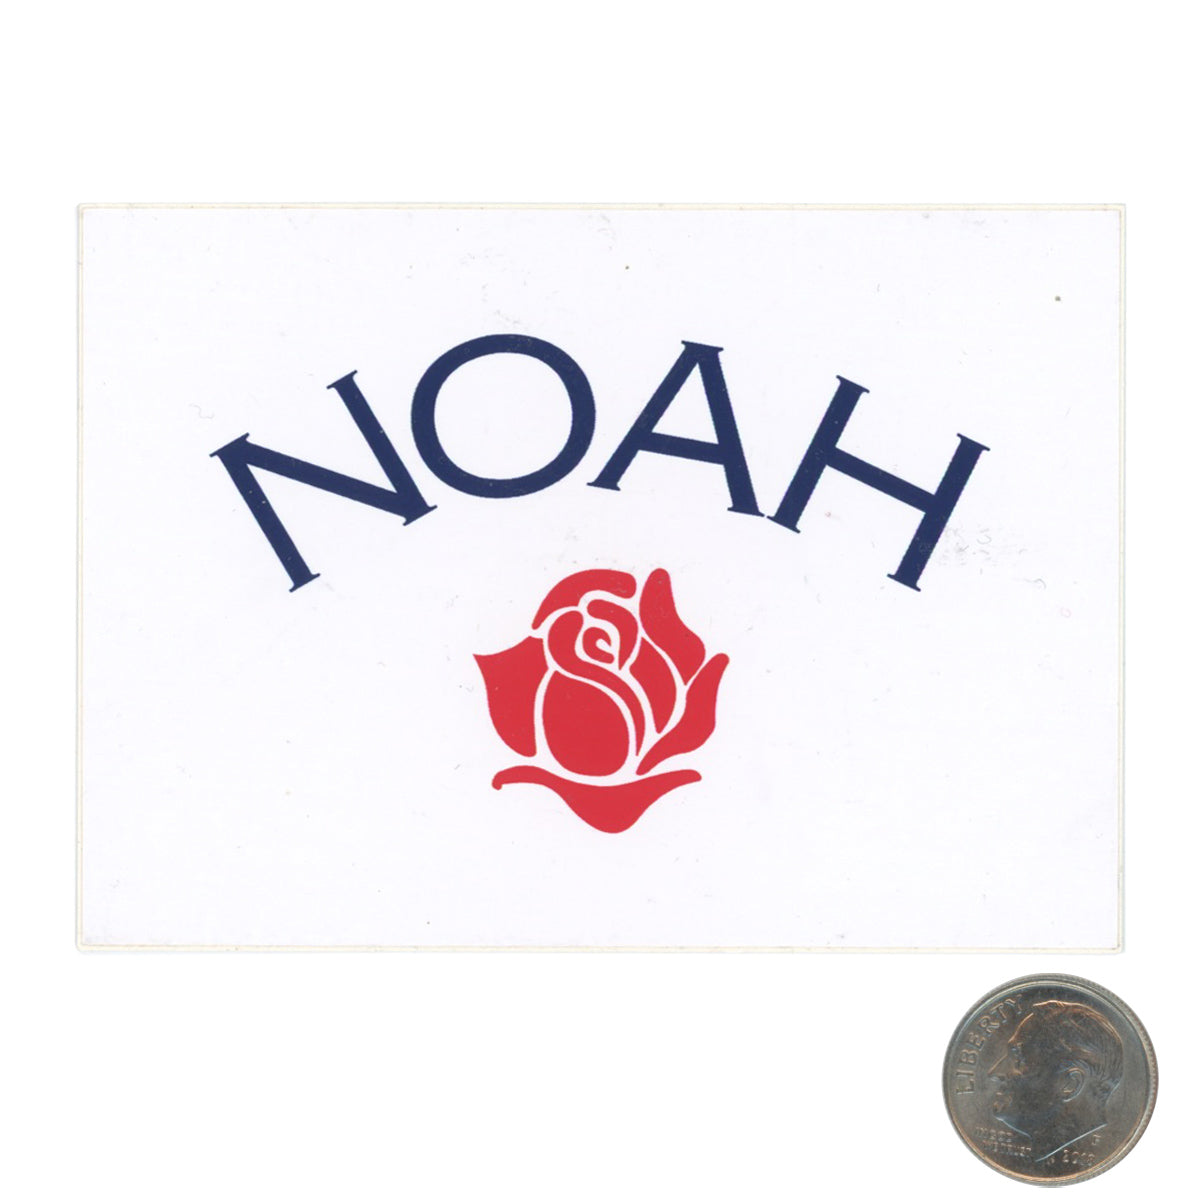 NOAH Red Rose Sticker with dime